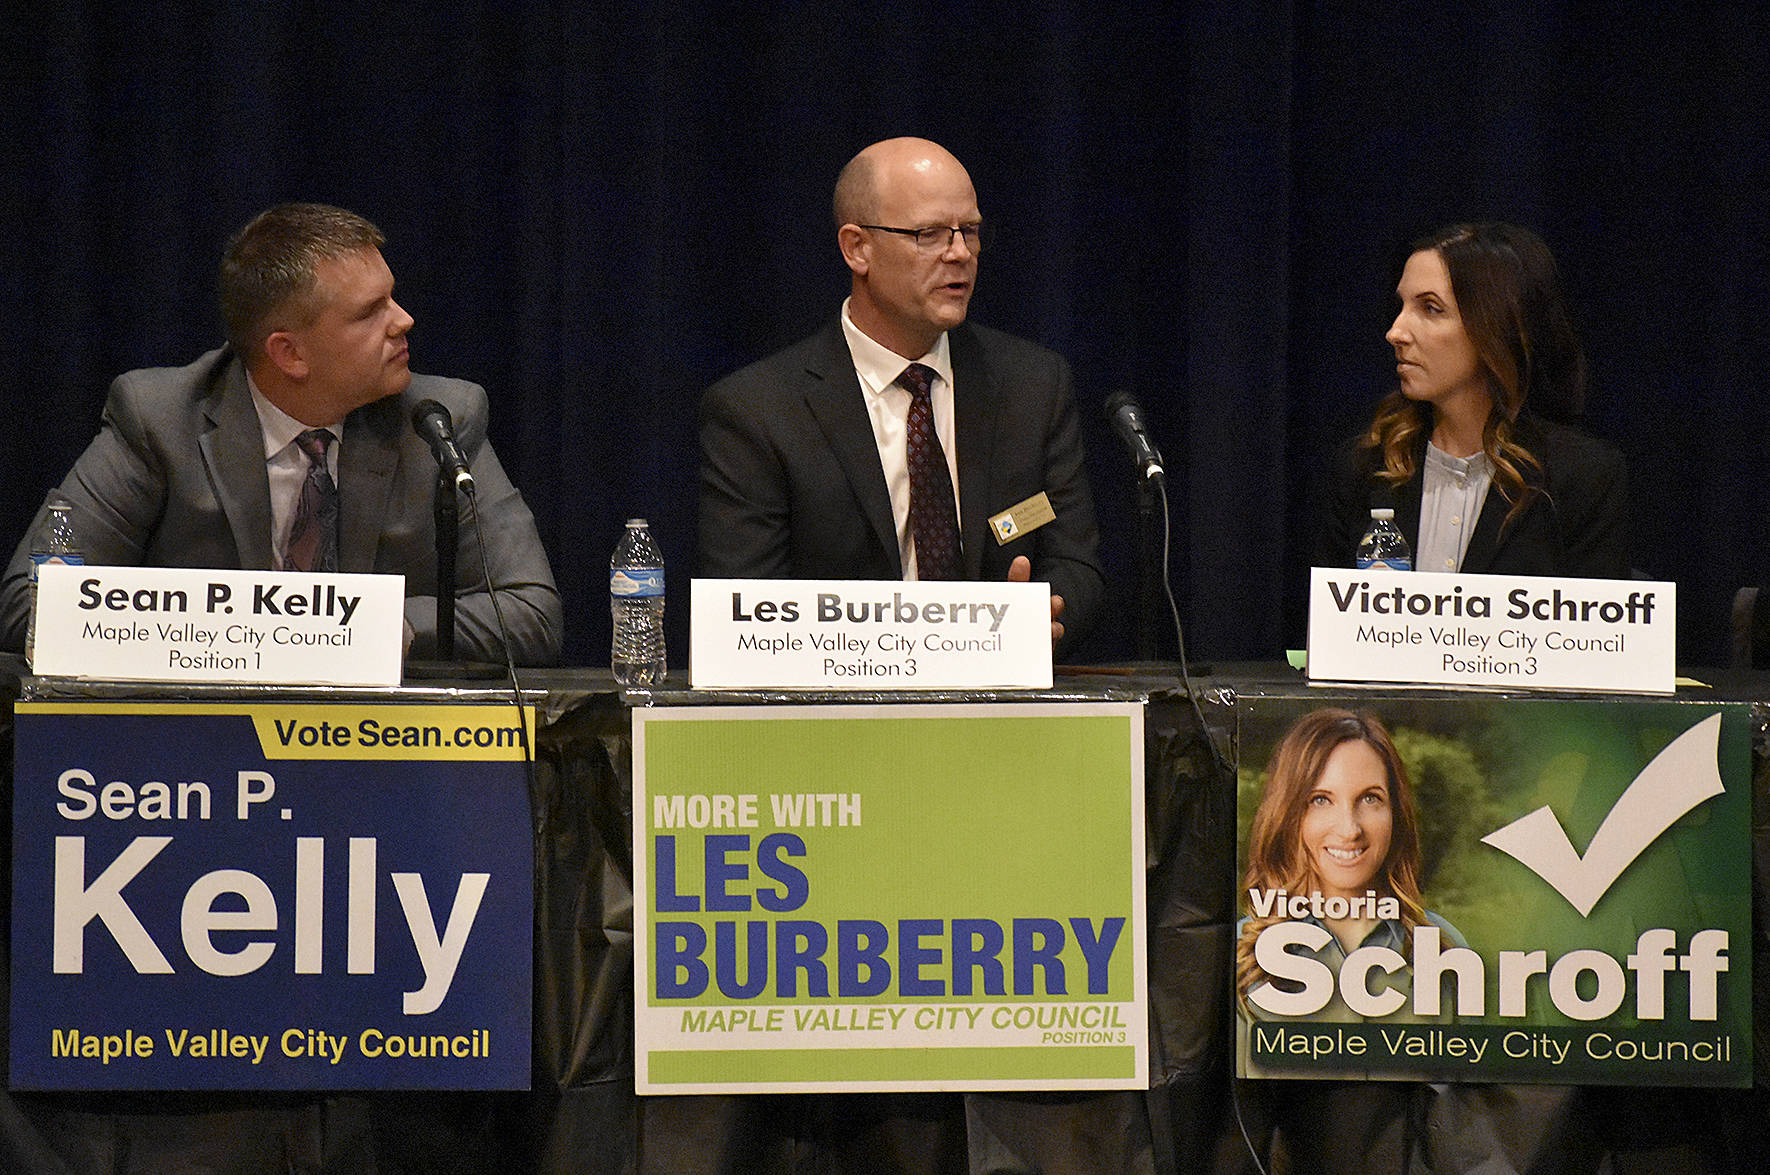 Photo by Haley Ausbun. Unopposed Position 1 candidate Sean Kelly, Position 3 candidates Les Burberry and Victoria Schroff at the Maple Valley candidate forum, Oct. 17.